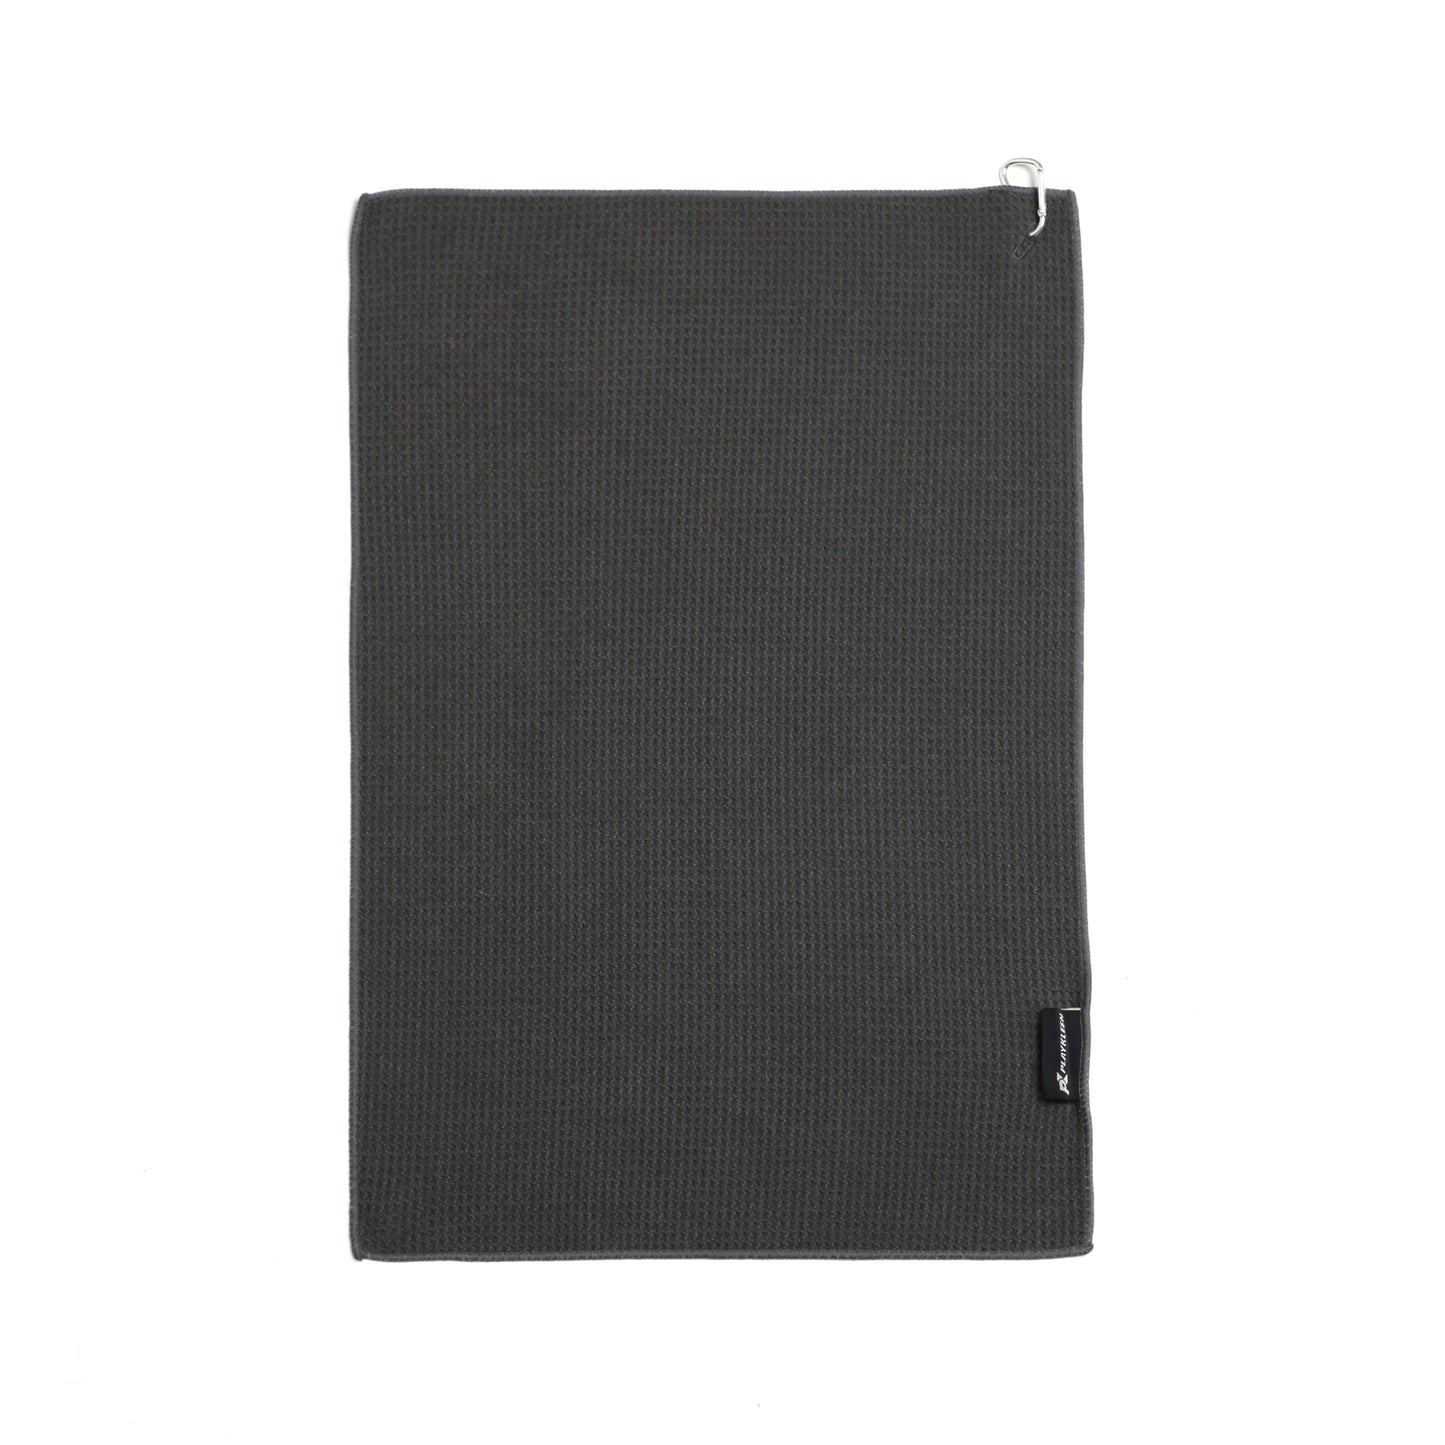 The Perfect PlayKleen Golf Towel